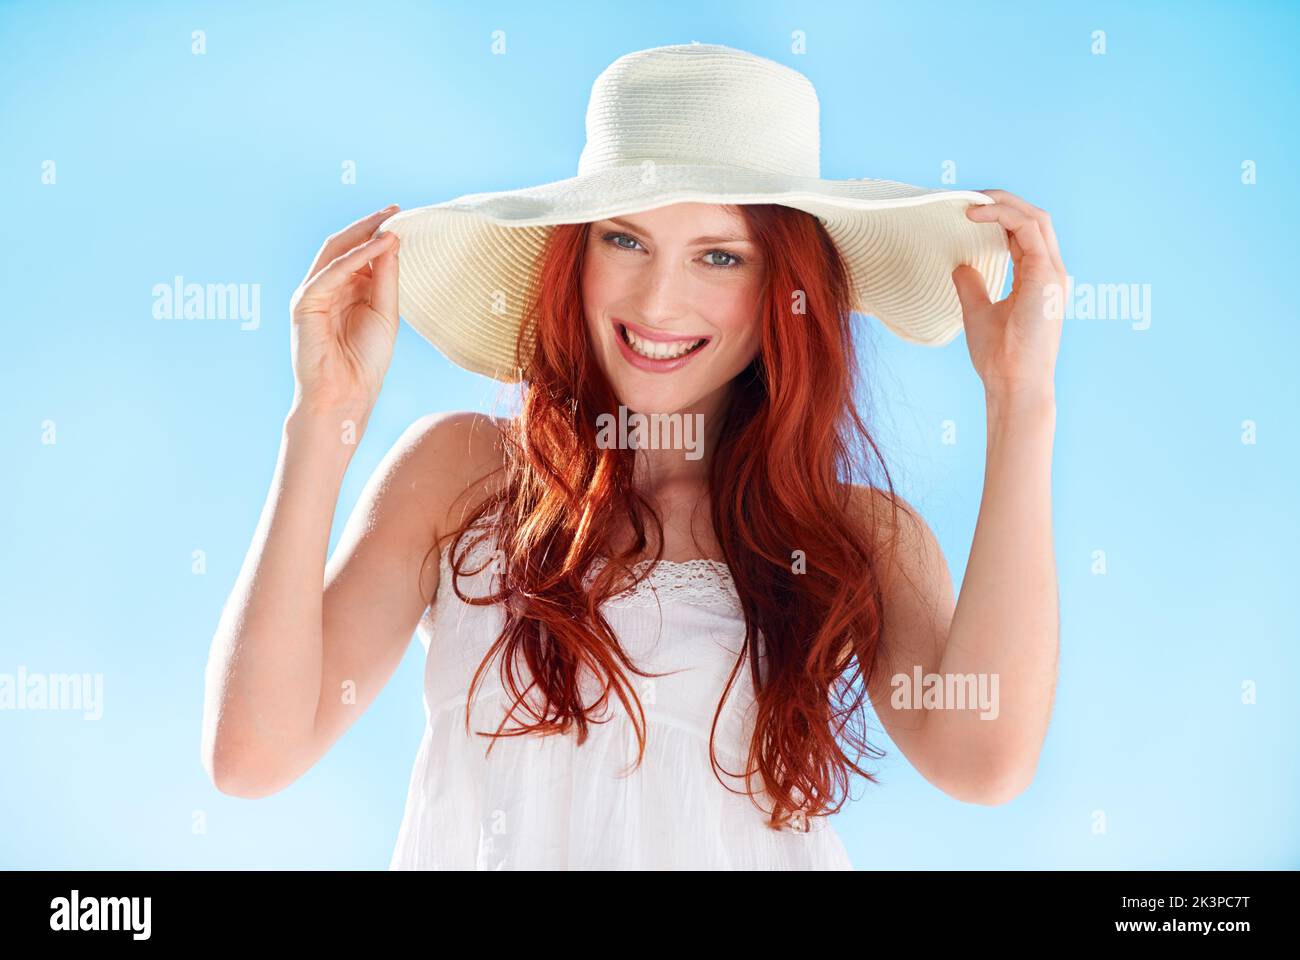 Protecting her delicate skin. A gorgeous young redheaded woman wearing a sunhat outside. Stock Photo